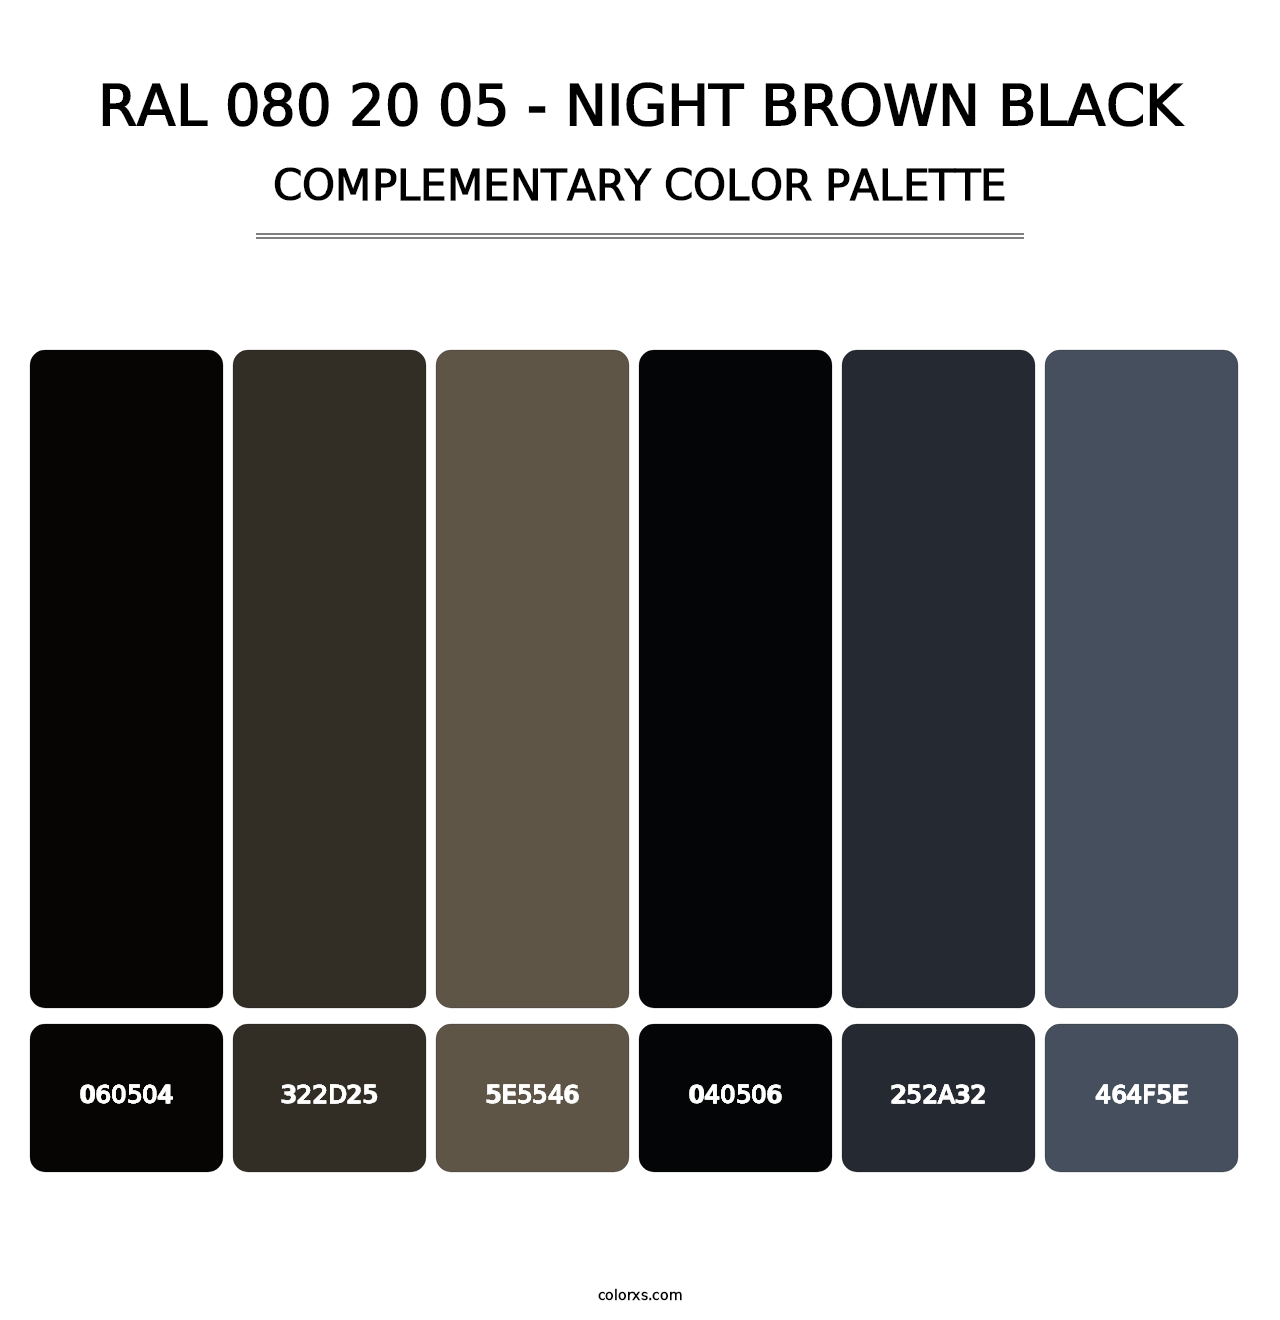 RAL 080 20 05 - Night Brown Black - Complementary Color Palette